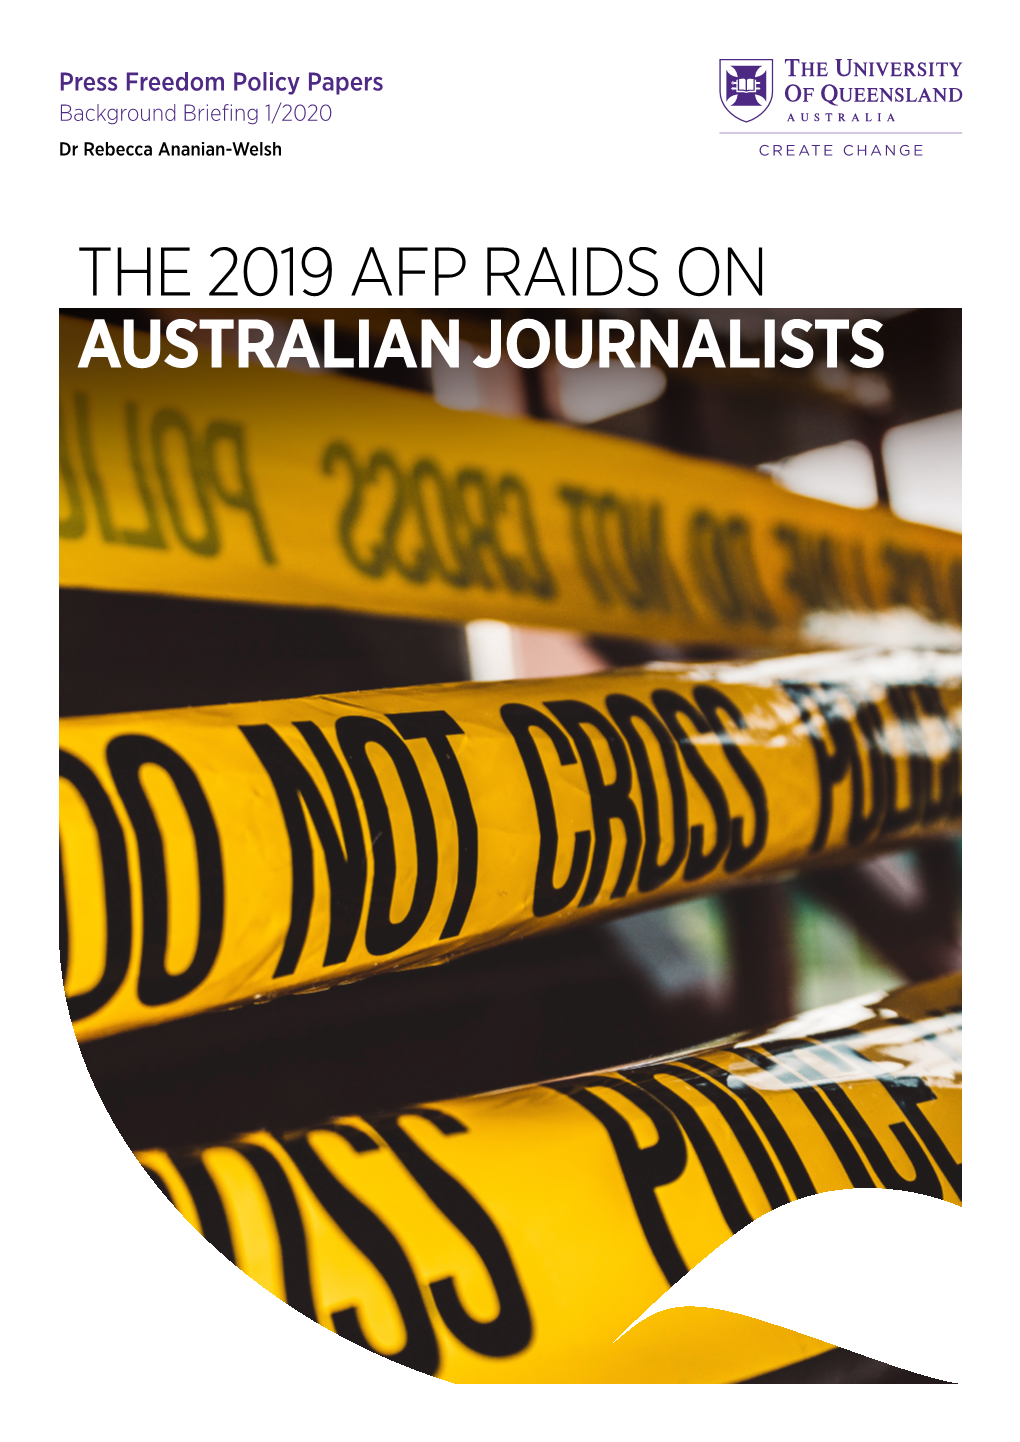 THE 2019 AFP RAIDS on AUSTRALIAN JOURNALISTS Press Freedom Policy Papers